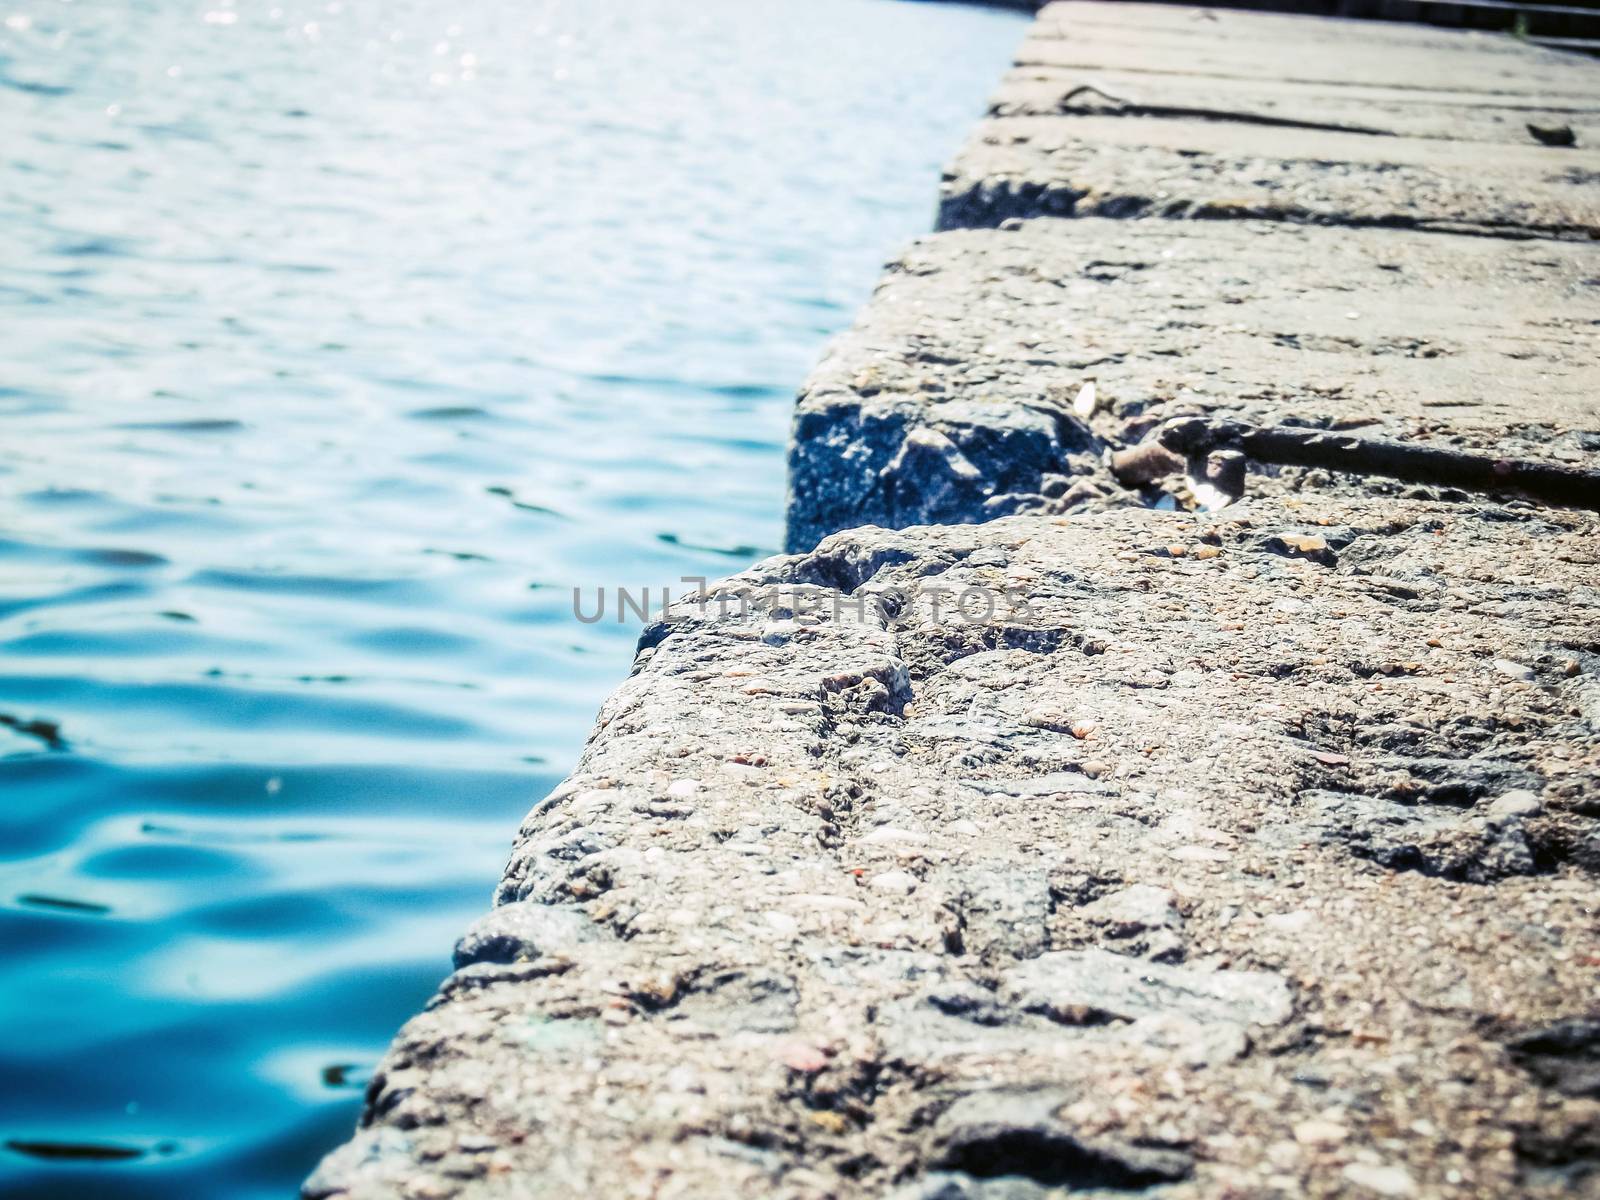 Phoro of stone slabs near the water in focus